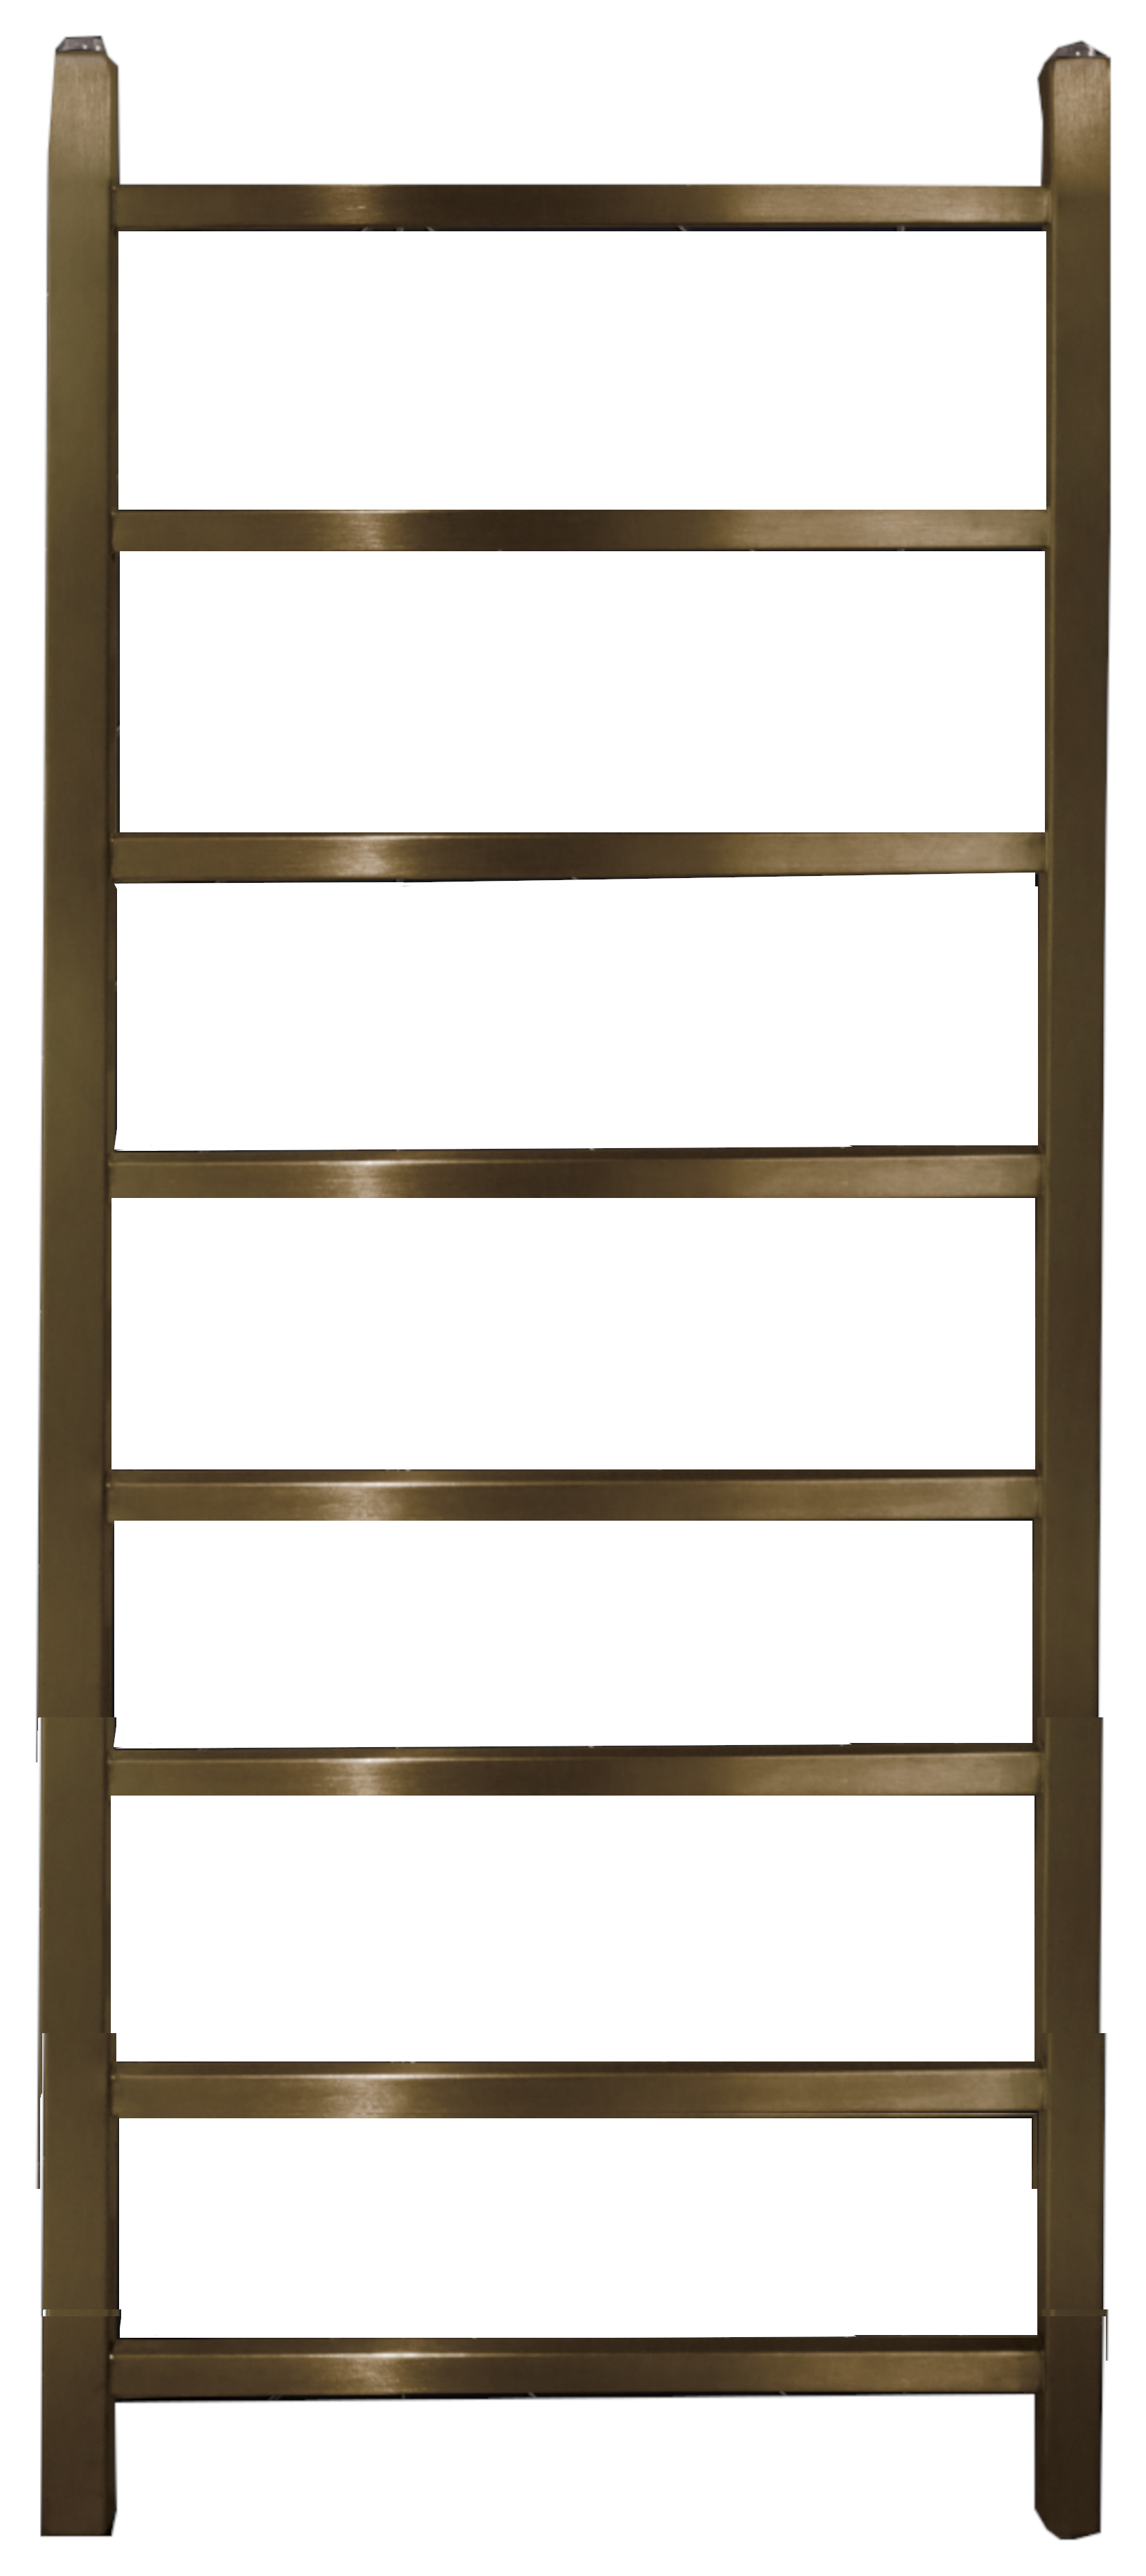 Towelrads Diva Brushed Brass Dry Electric Non Thermostatic Towel Radiator - 1200 x 500mm